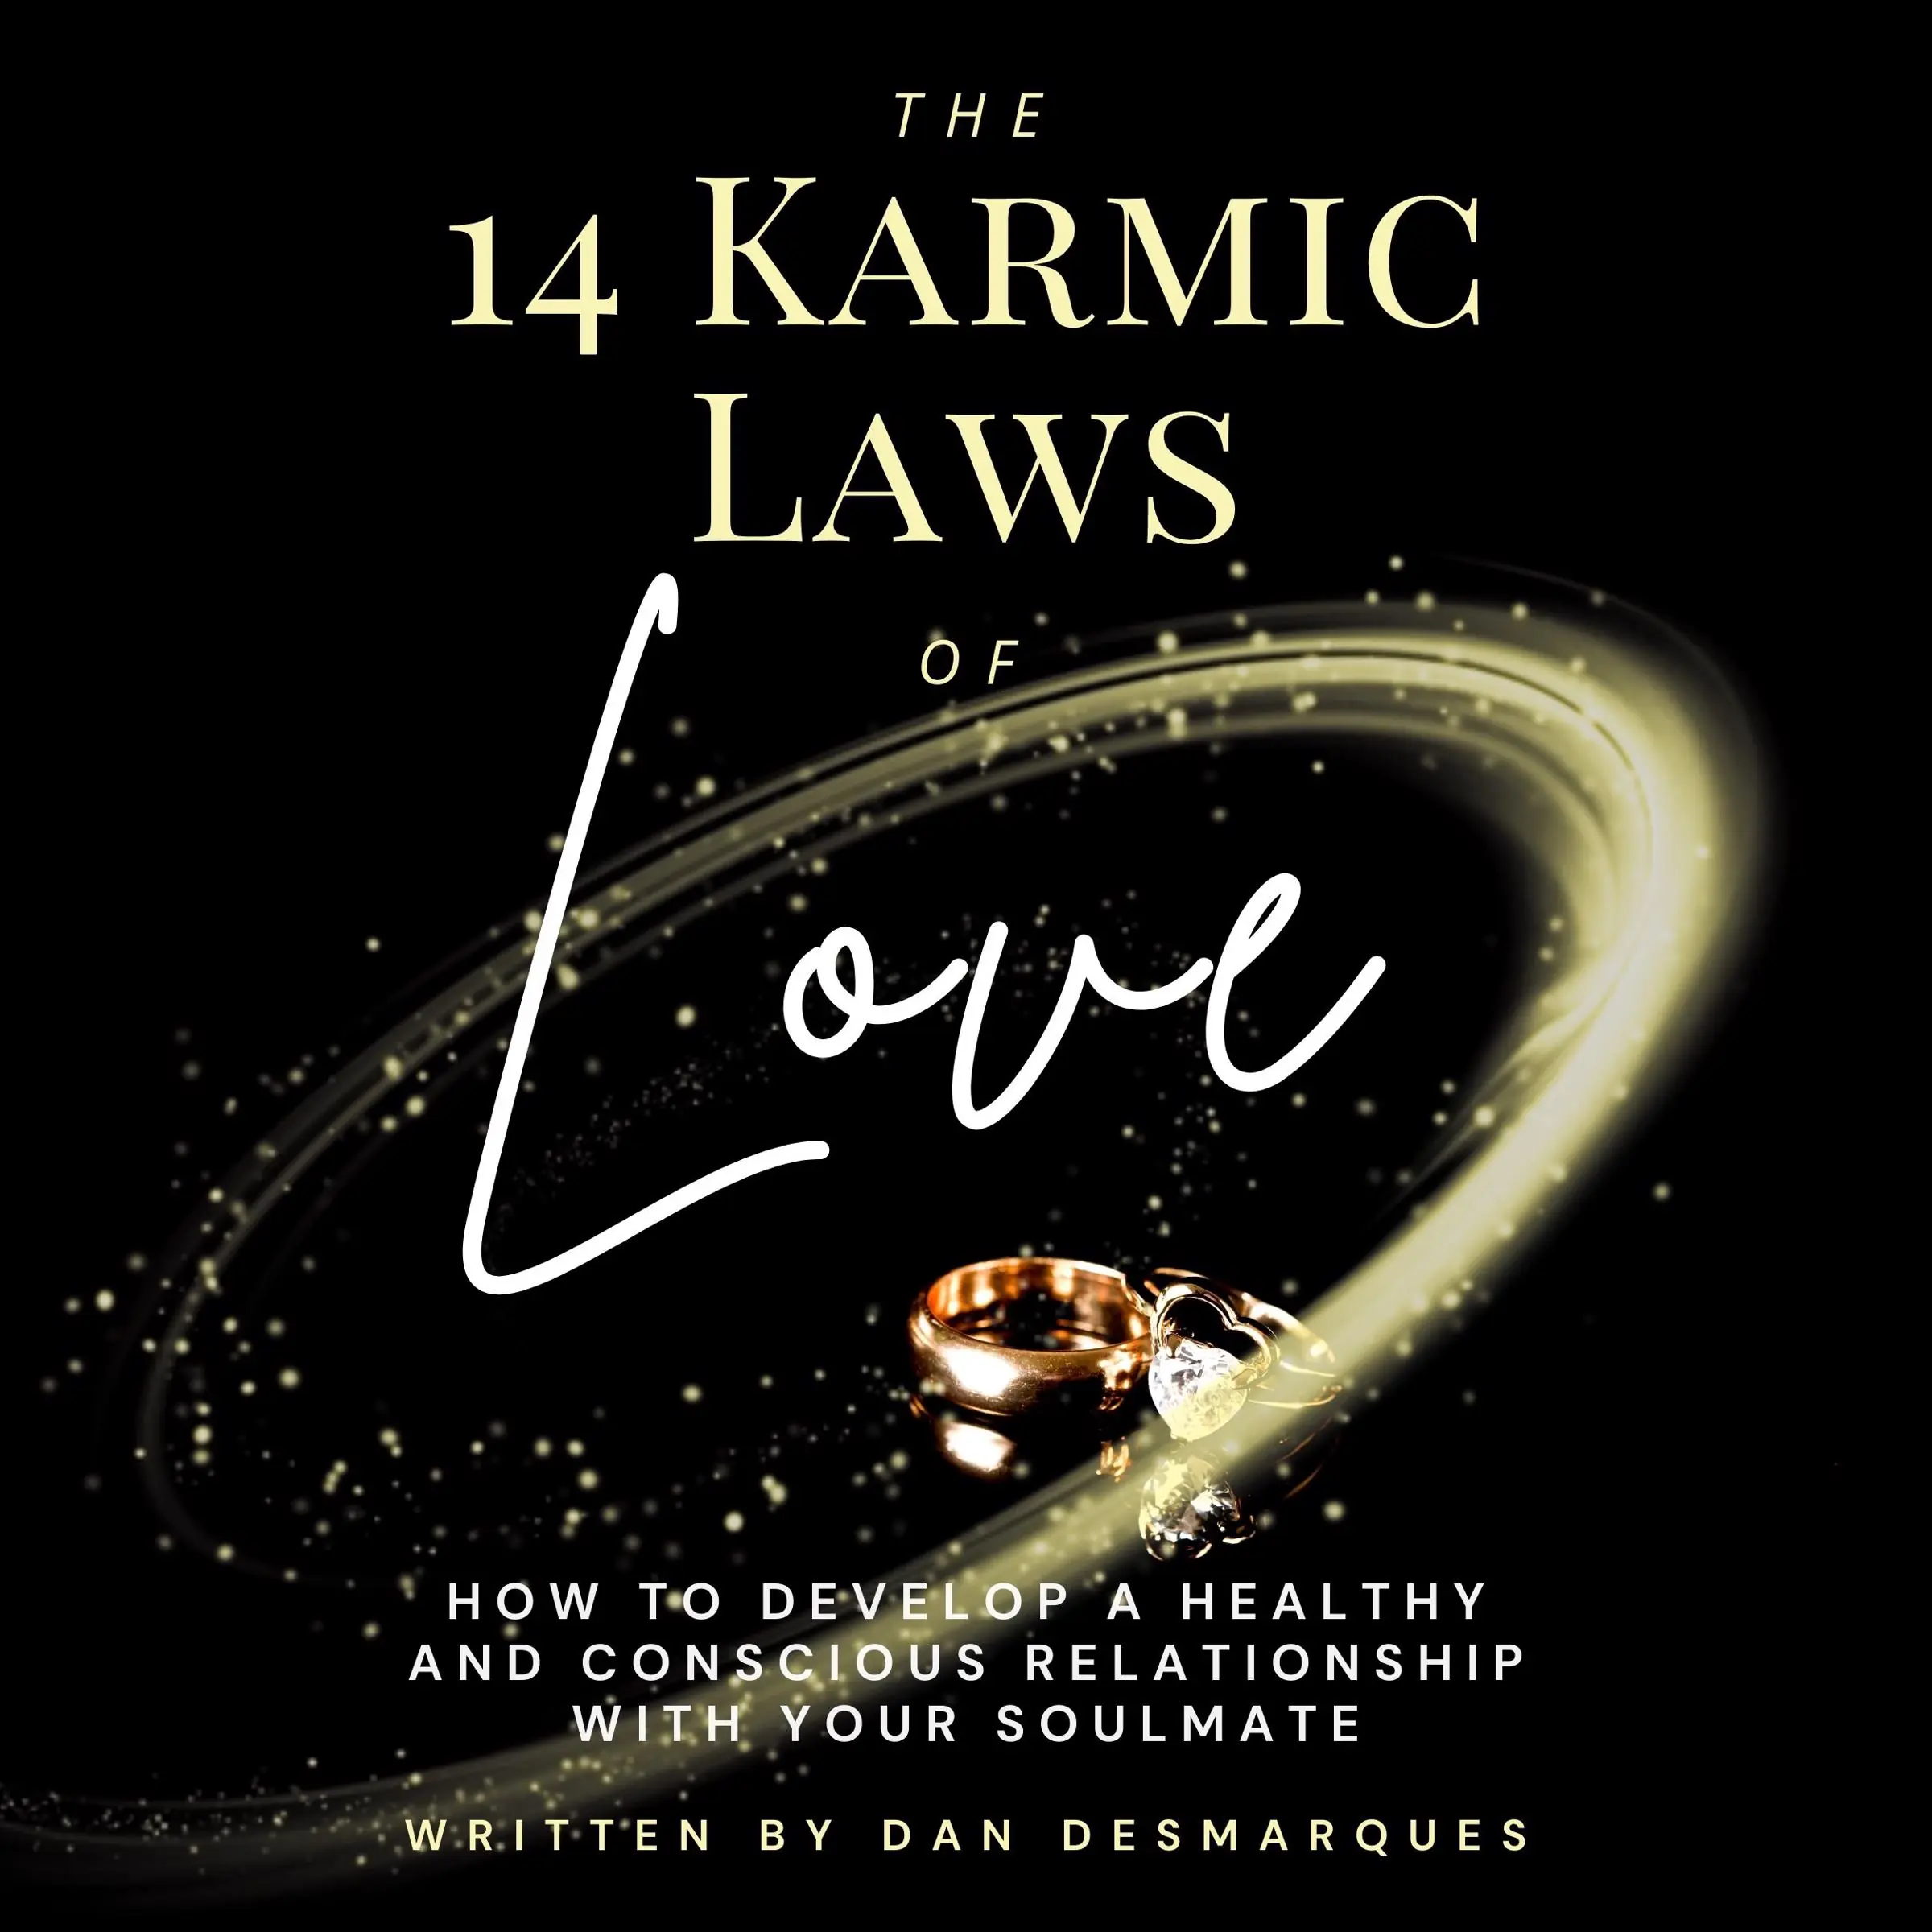 The 14 Karmic Laws of Love: How to Develop a Healthy and Conscious Relationship With Your Soulmate Audiobook by Dan Desmarques